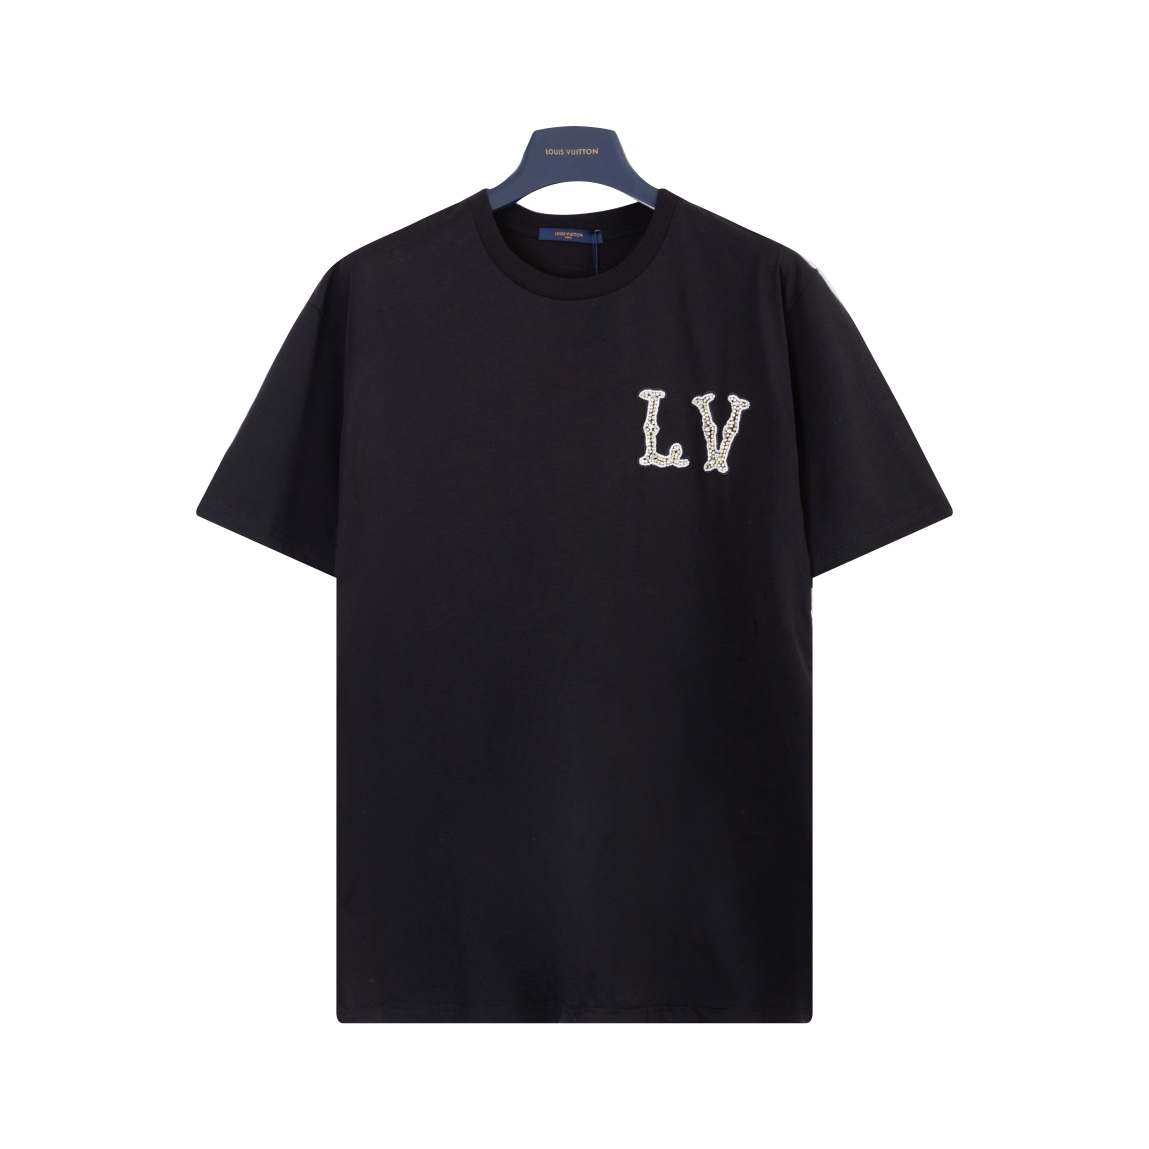 Louis Vuitton Knockoff
 Clothing T-Shirt Black Embroidery Unisex Cotton Spring/Summer Collection Short Sleeve